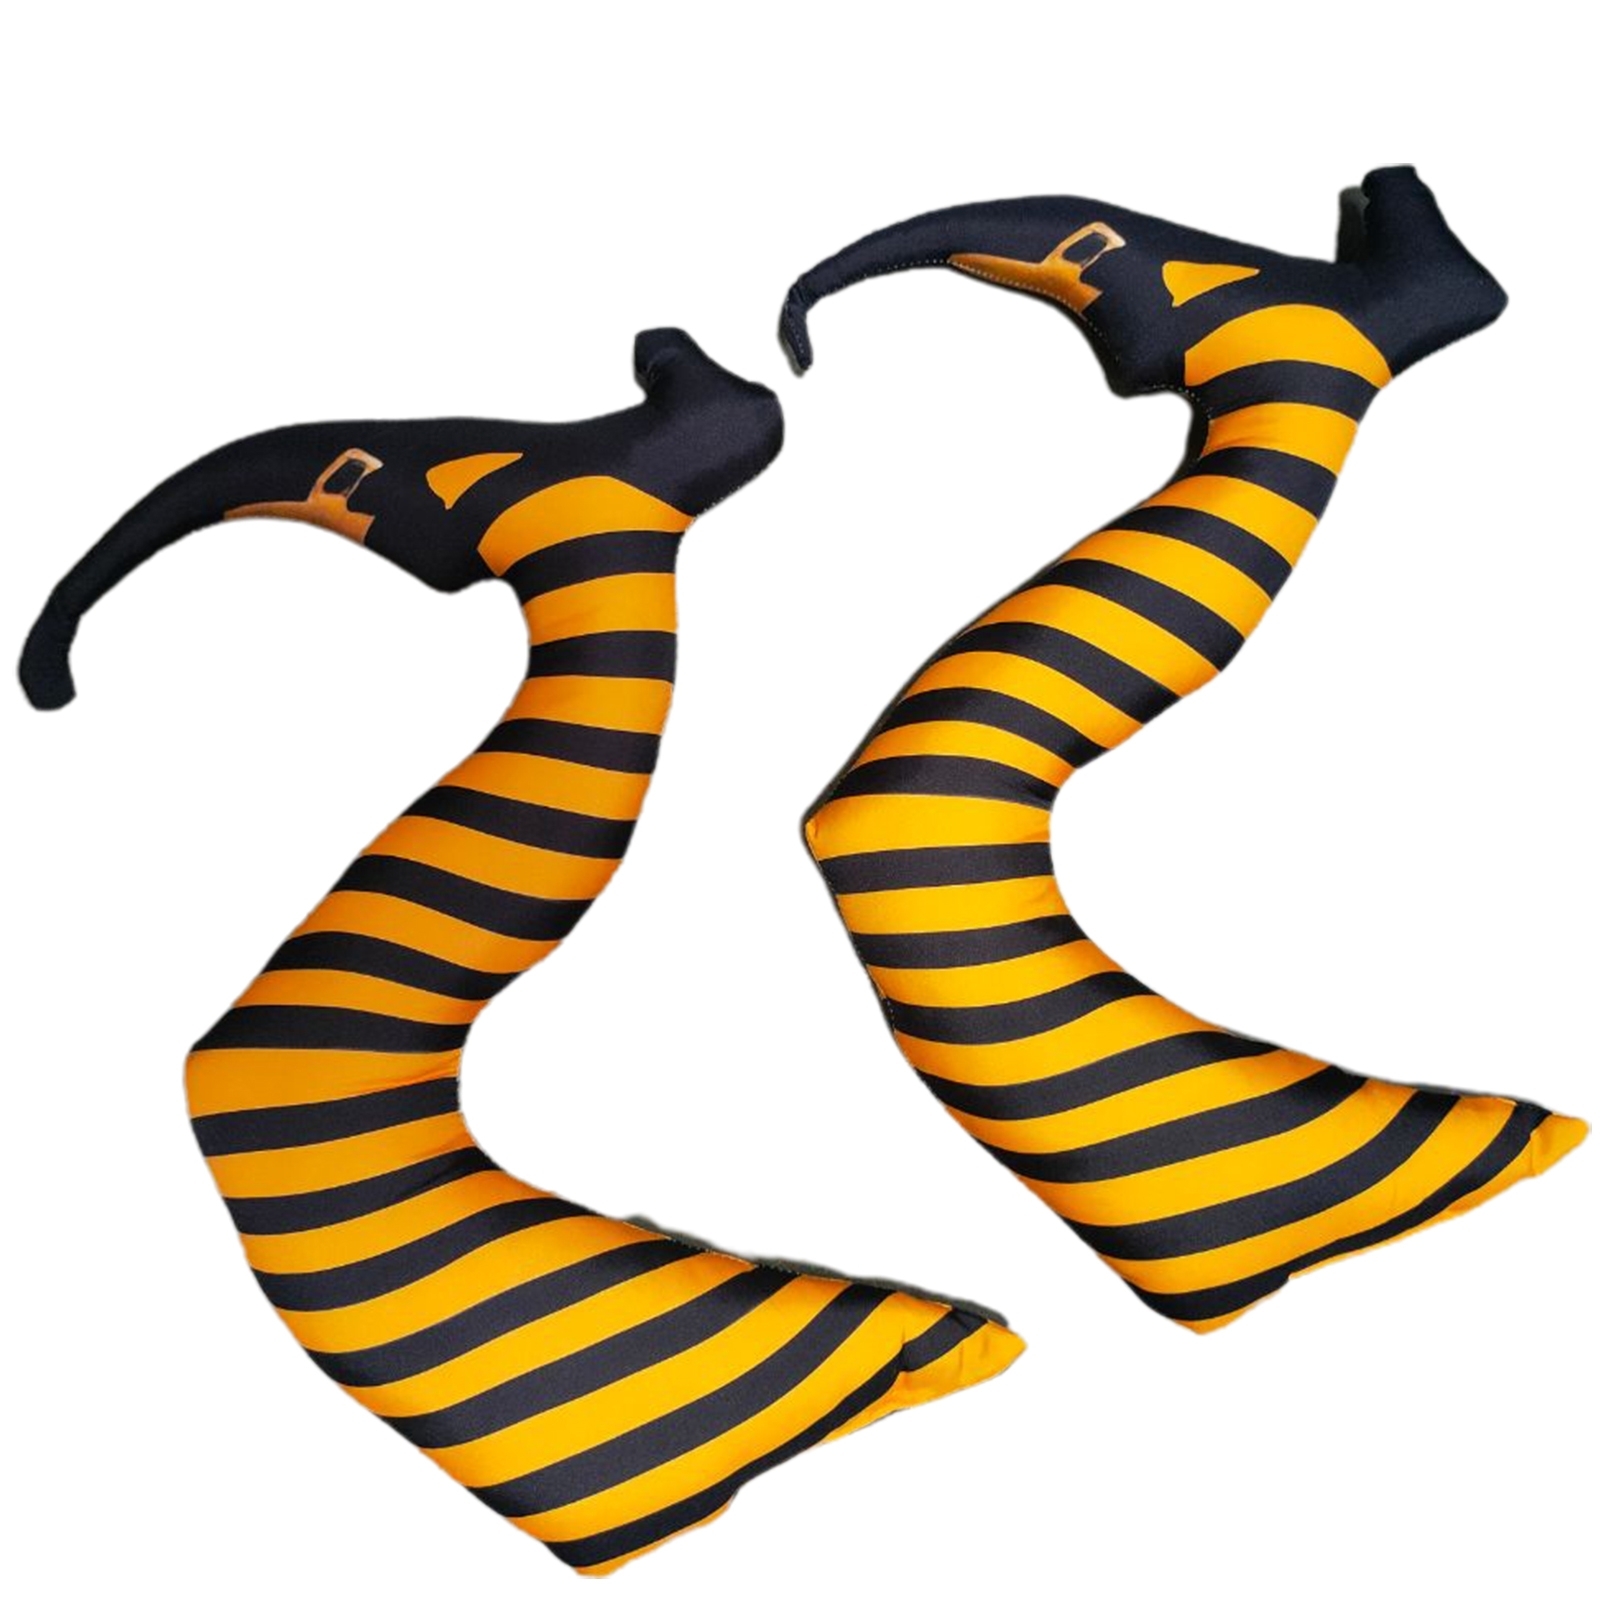 1 Pair Witch Legs Vibrant Color Ornamental Fabric Holiday Striped Legs Decorations Home Decor - yellow black